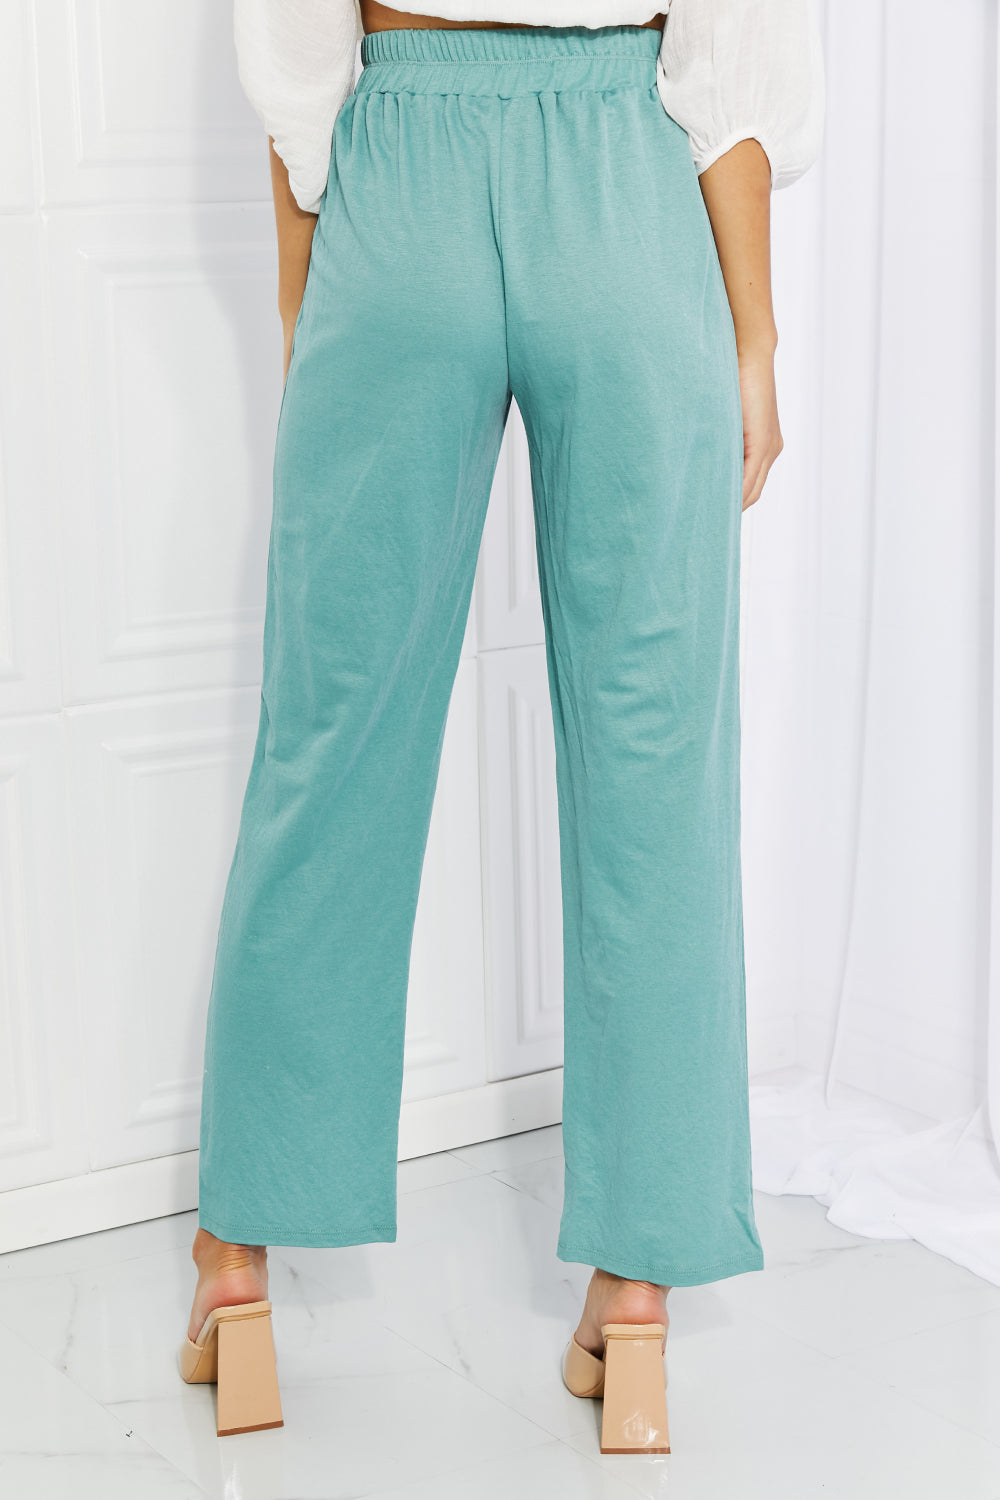 Blumin Apparel Take Me Away Full Size Straight Leg Pants in Seafoam Print on any thing USA/STOD clothes